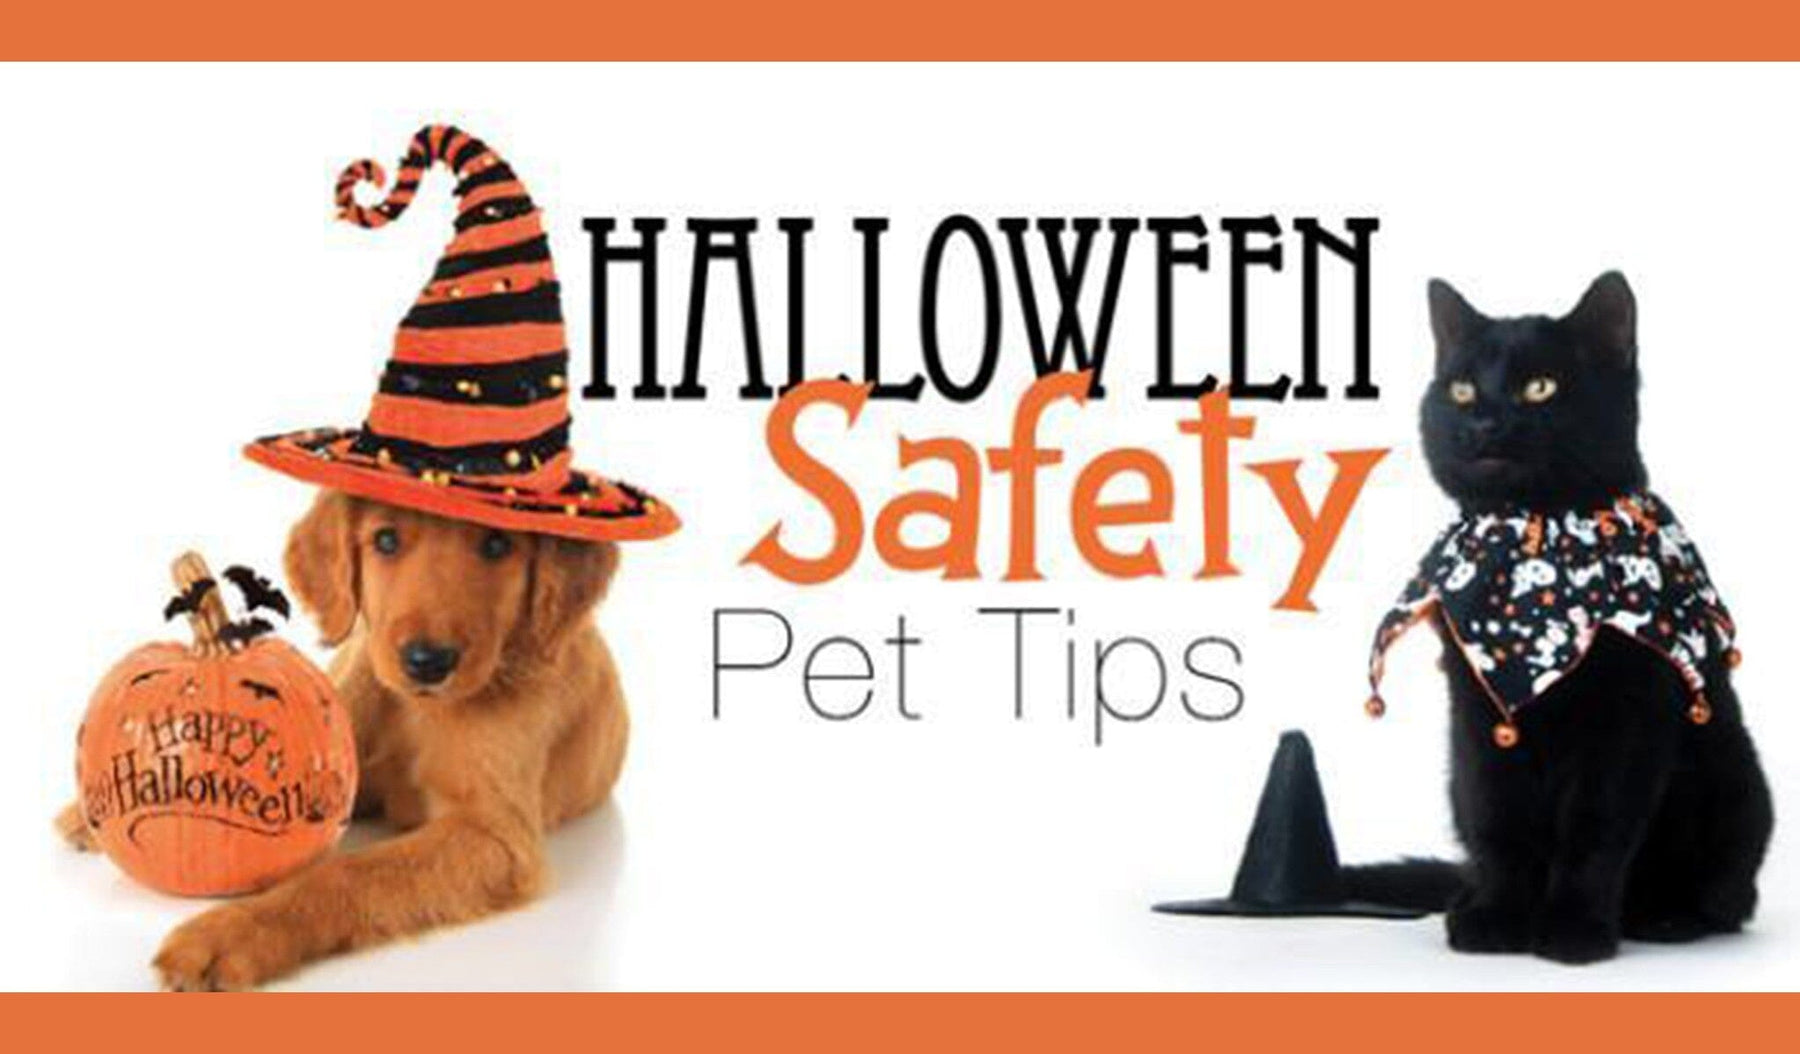 dog and cat dressed up for Halloween with pet safety sign